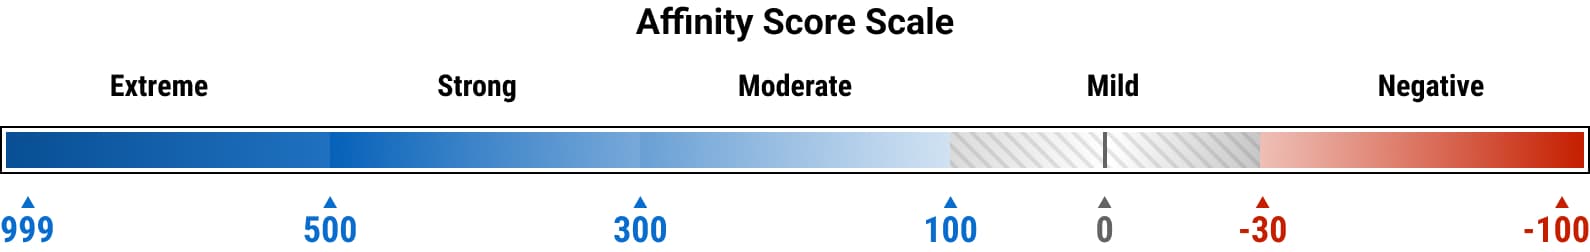 Affinity Score Scale graphic. Extreme from 999 to 500, Strong from 500 to 300, Moderate from 300 to 100, Mild from 100 to -30, Negative from -30 to -100.